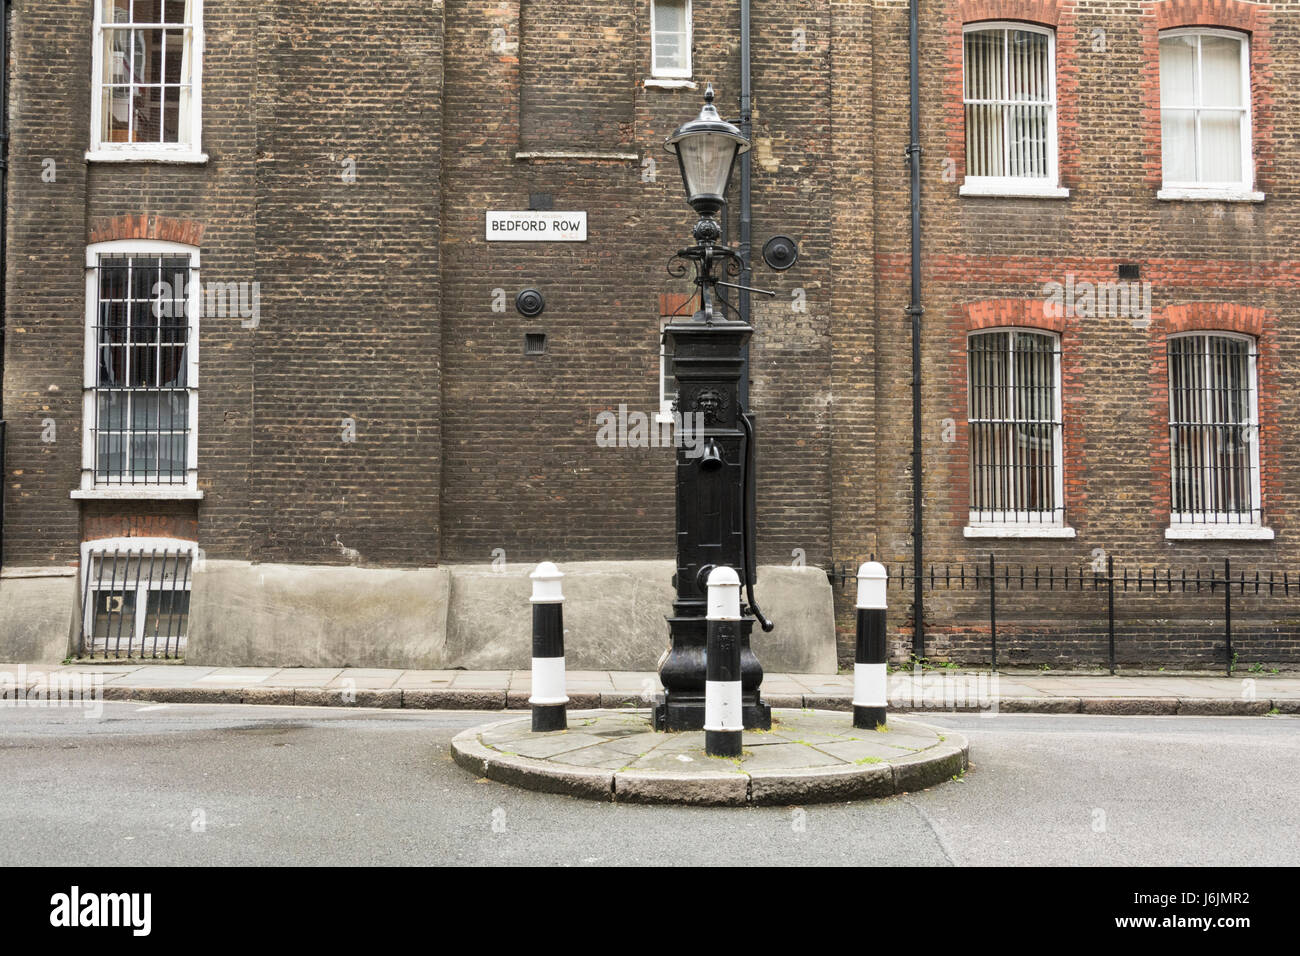 Water Pump, Bedford Row in London Borough of Camden, opposite Brownlow Street, London WC1R Stock Photo